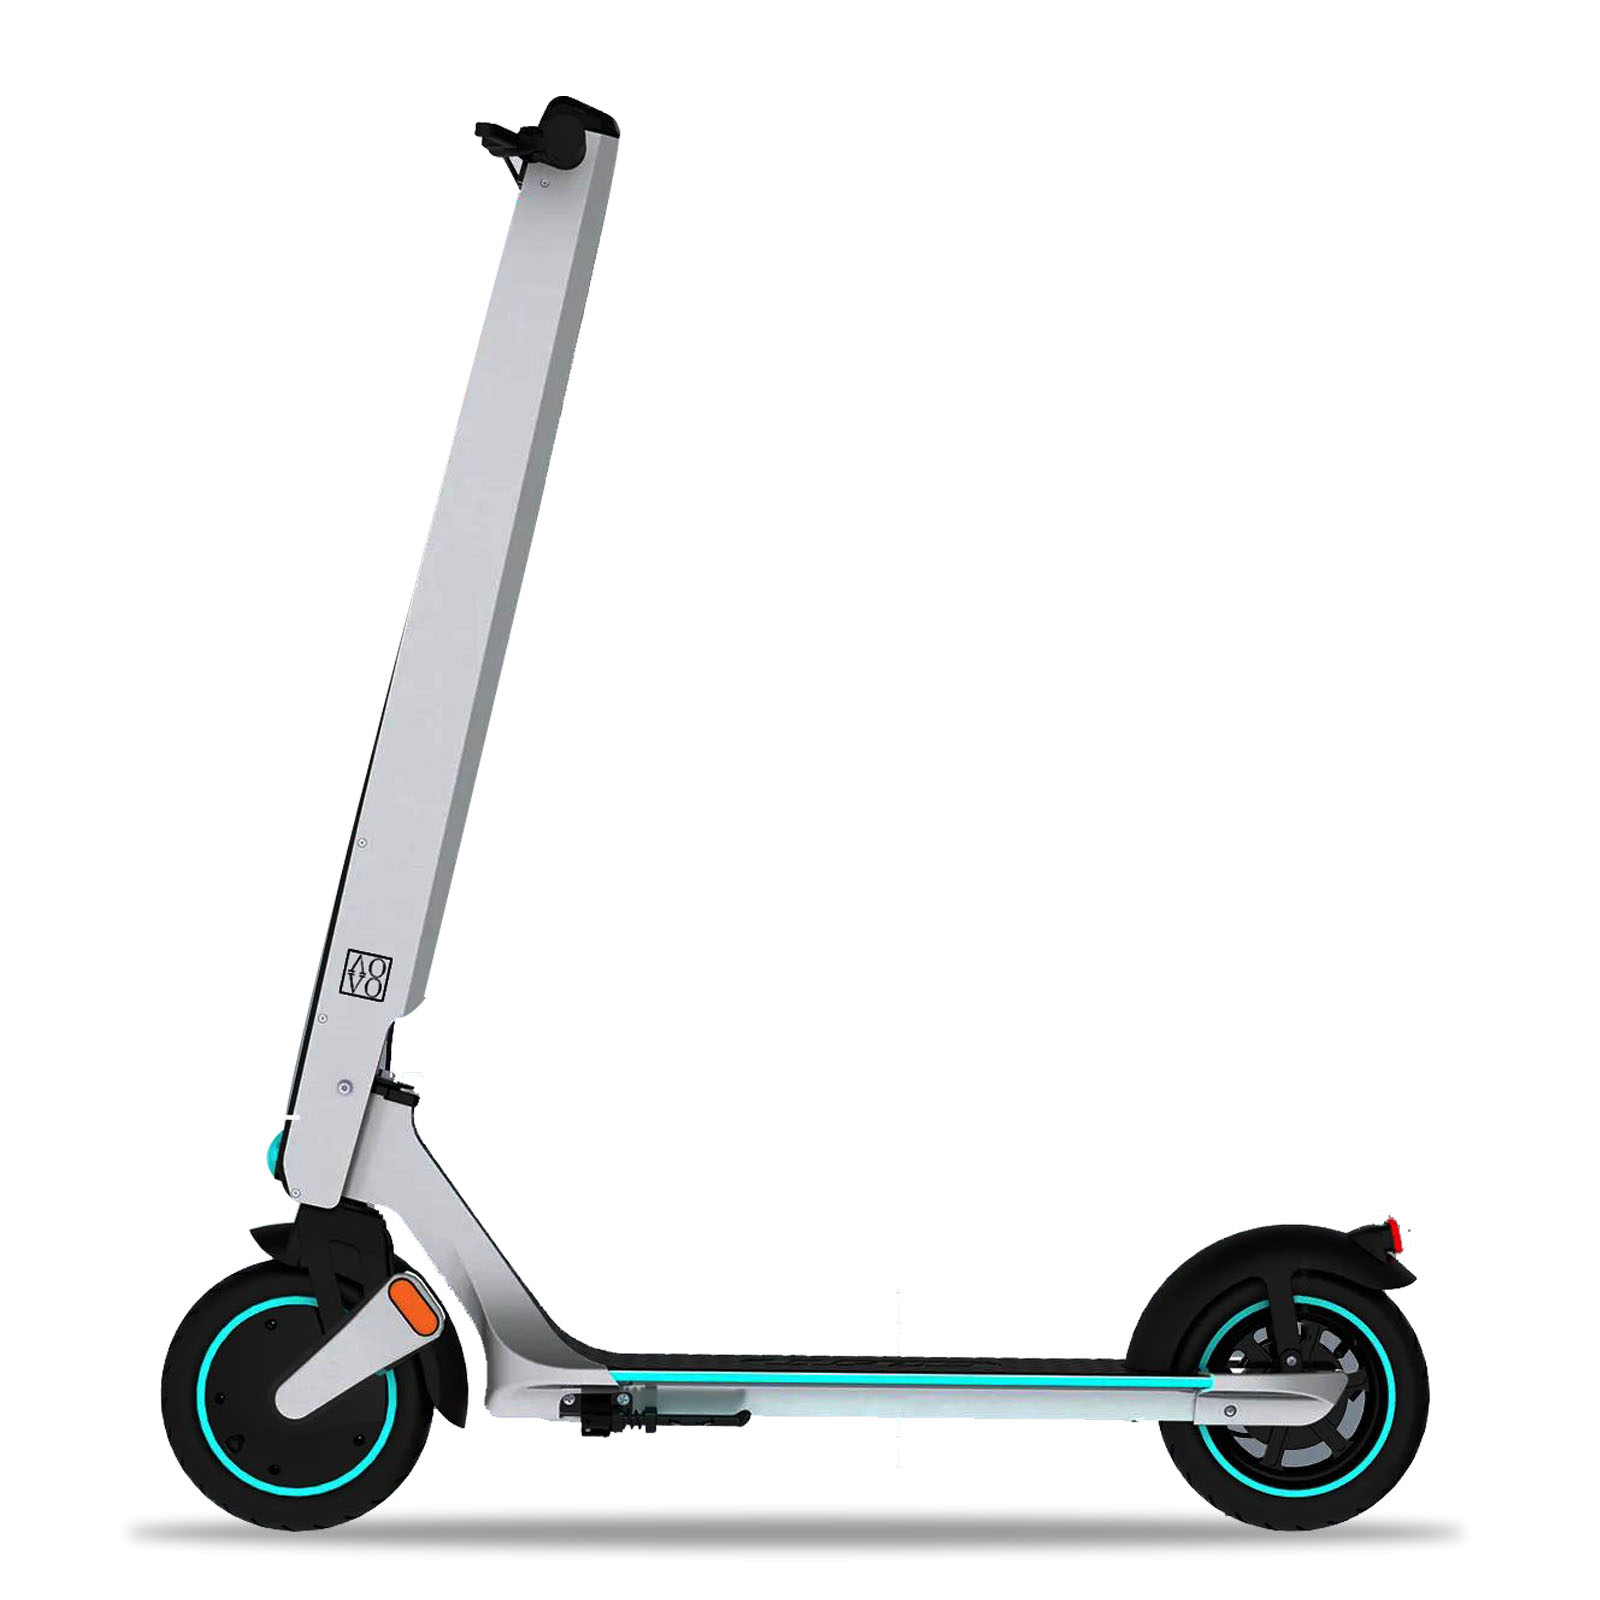 AOVO®Lirpe R1 promax, First solar electric scooter in the world